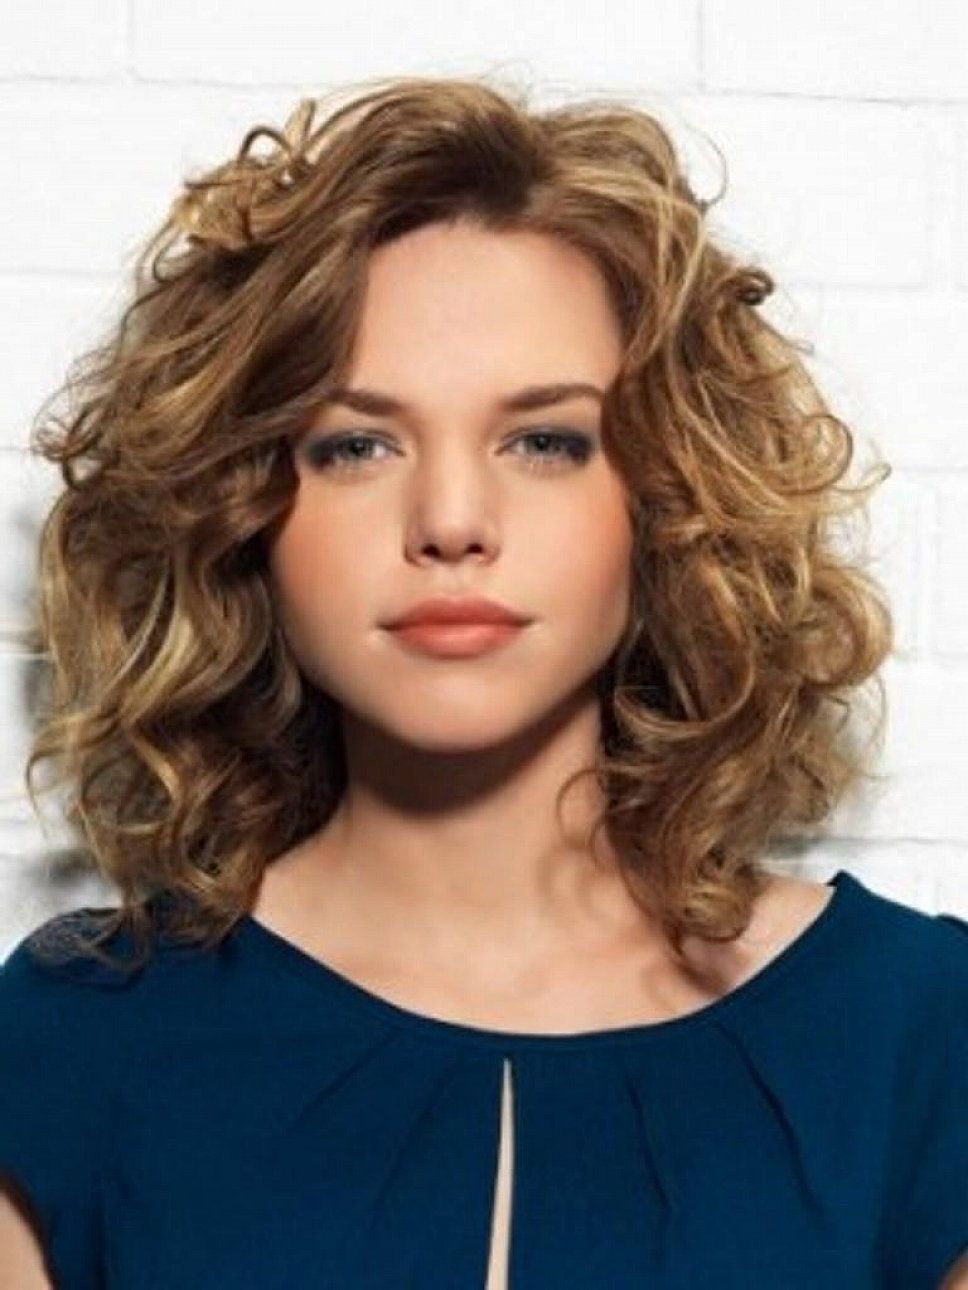 Well Liked Medium Hairstyles For Round Faces Curly Hair Regarding Medium Wavy Hairstyle With Swept Bangs For Women With Thick Hair And (View 2 of 20)